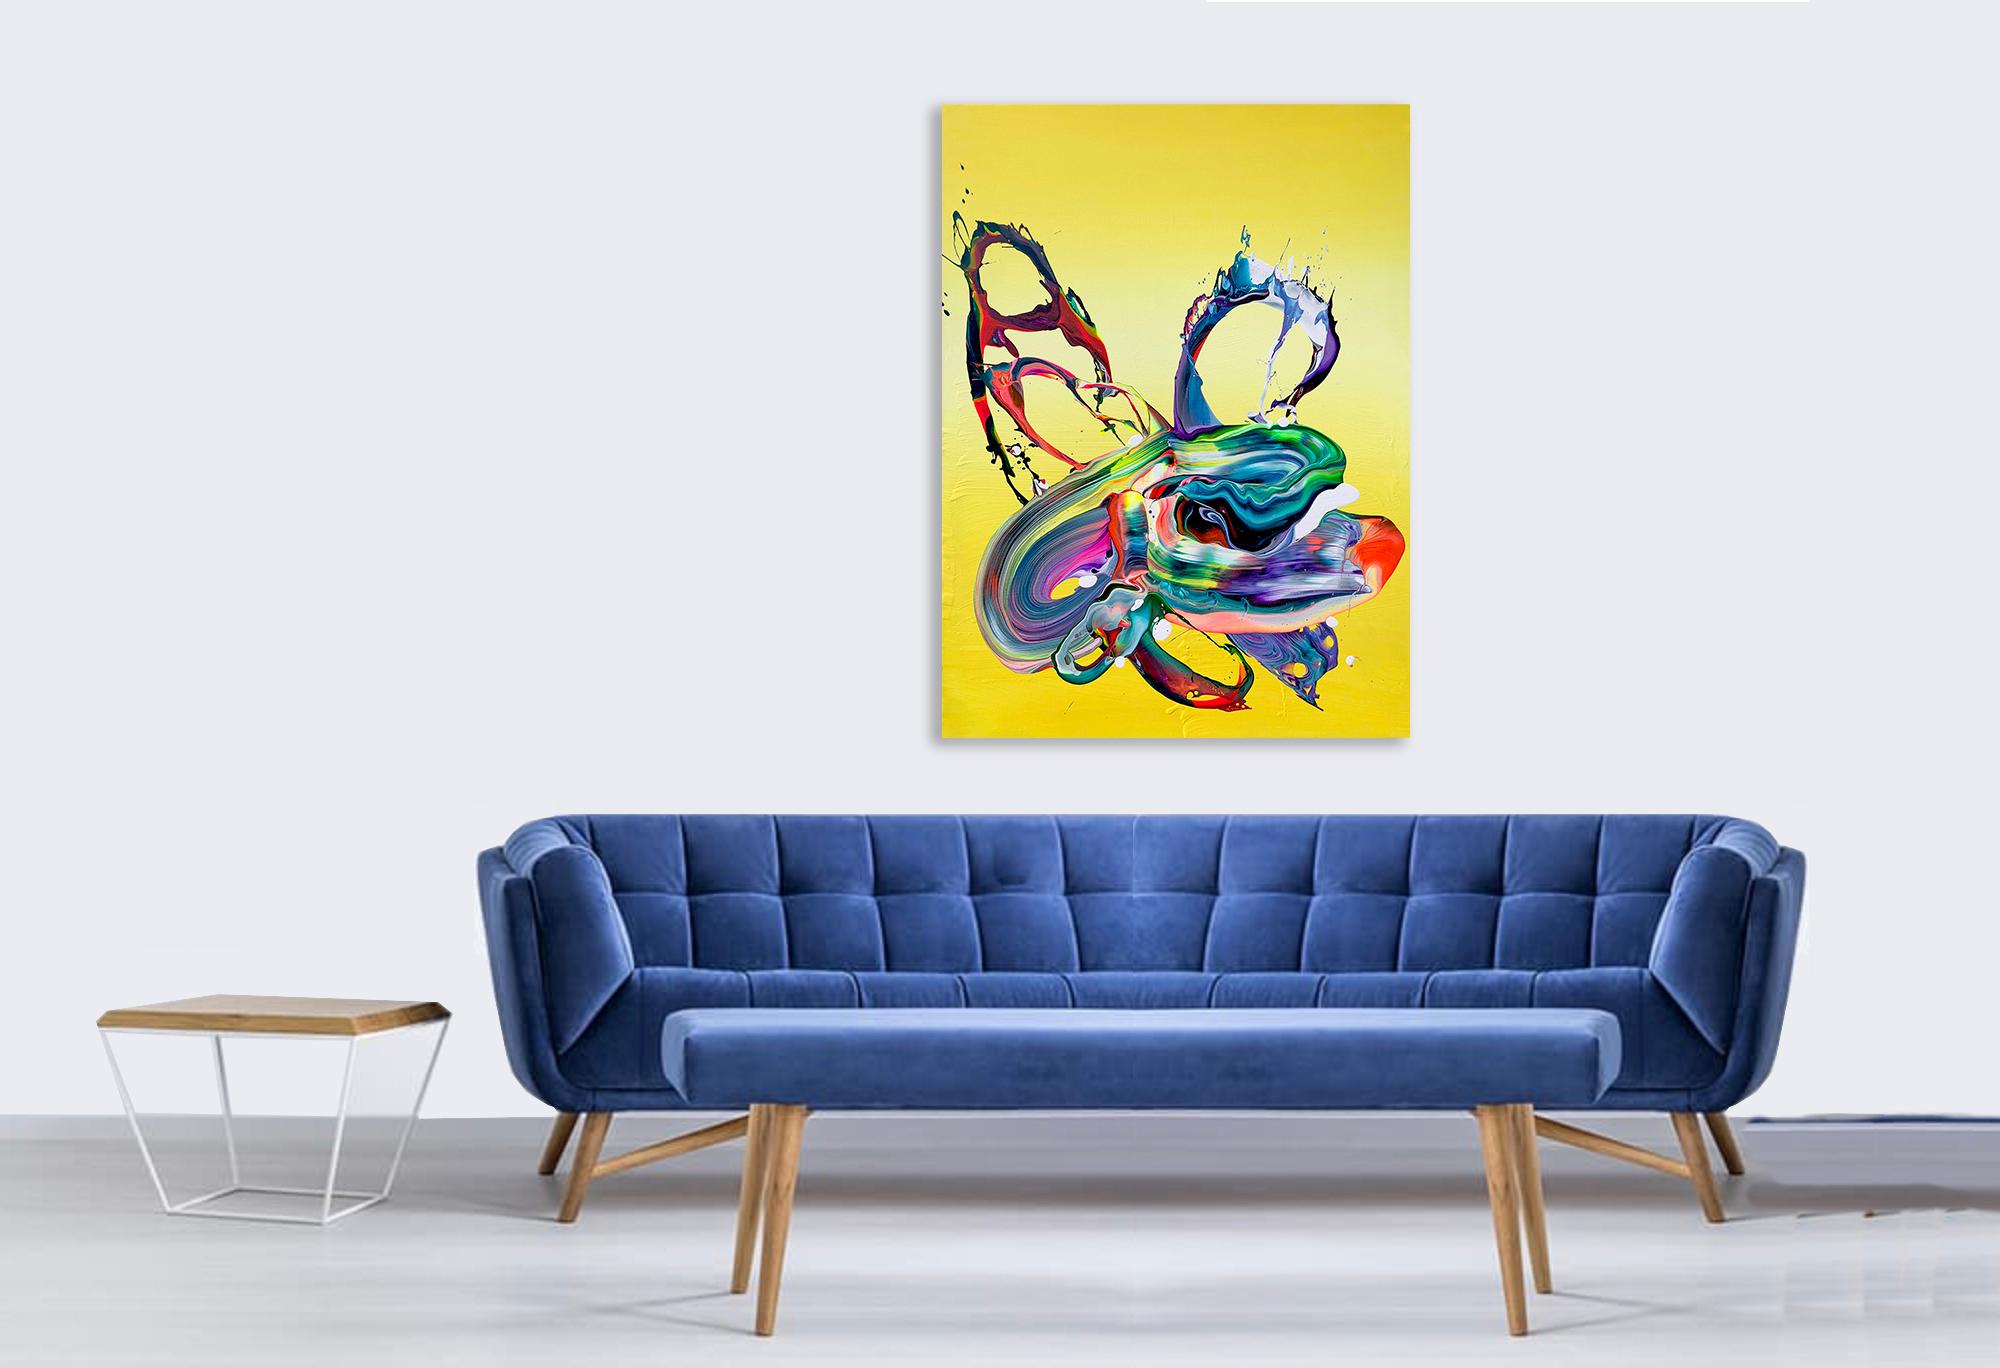 Artist: Alex Voinea

Title: Yellow Flow AV 455

Medium: Acrylics on linen

Size: 130 x 97 cm
Fading backgrounds create depth and perspective in an abstract work, but with an almost hyper-realist definition, in which Voinea transmits a vibrancy of